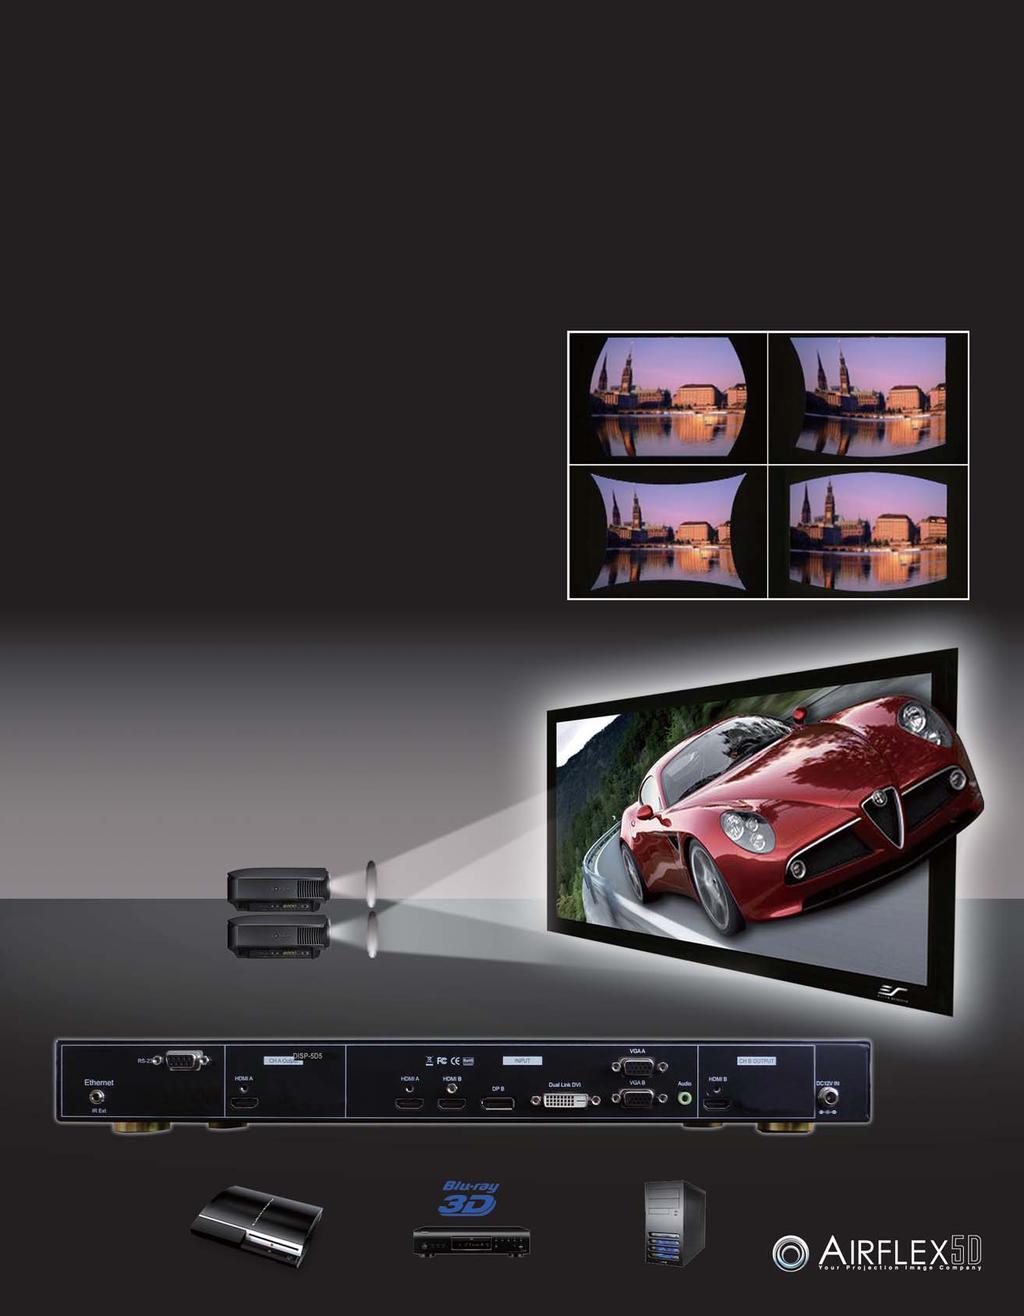 Passive HD 3D projection has always been exclusively limited to commercial applications due to the complexity of setup as well as its high price.